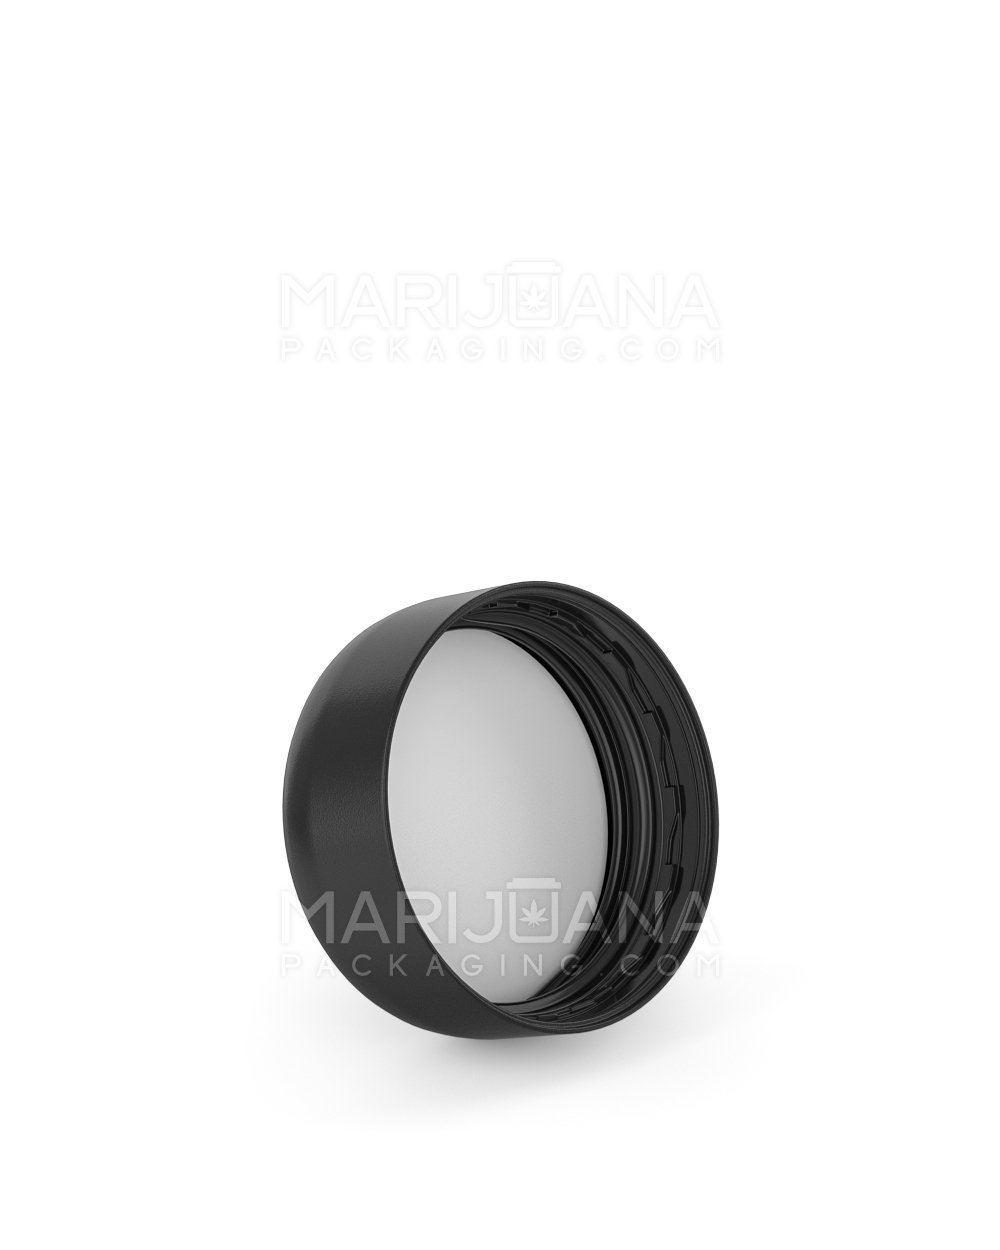 Child Resistant | Smooth Push Down & Turn Plastic Caps w/ Foam Liner | 29mm - Semi Gloss Black - 504 Count - 2